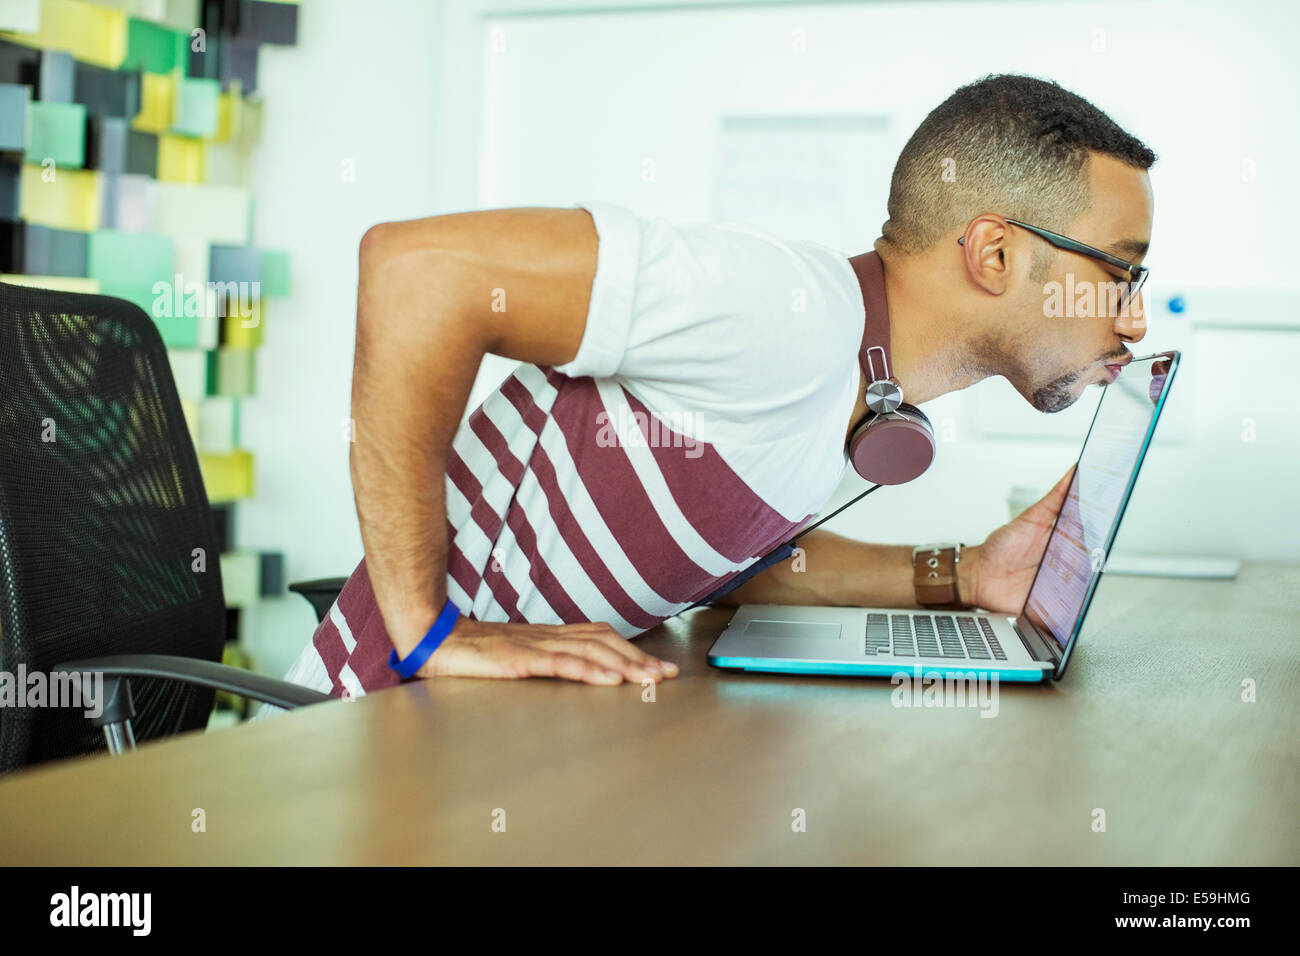 Man kissing laptop in office Stock Photo